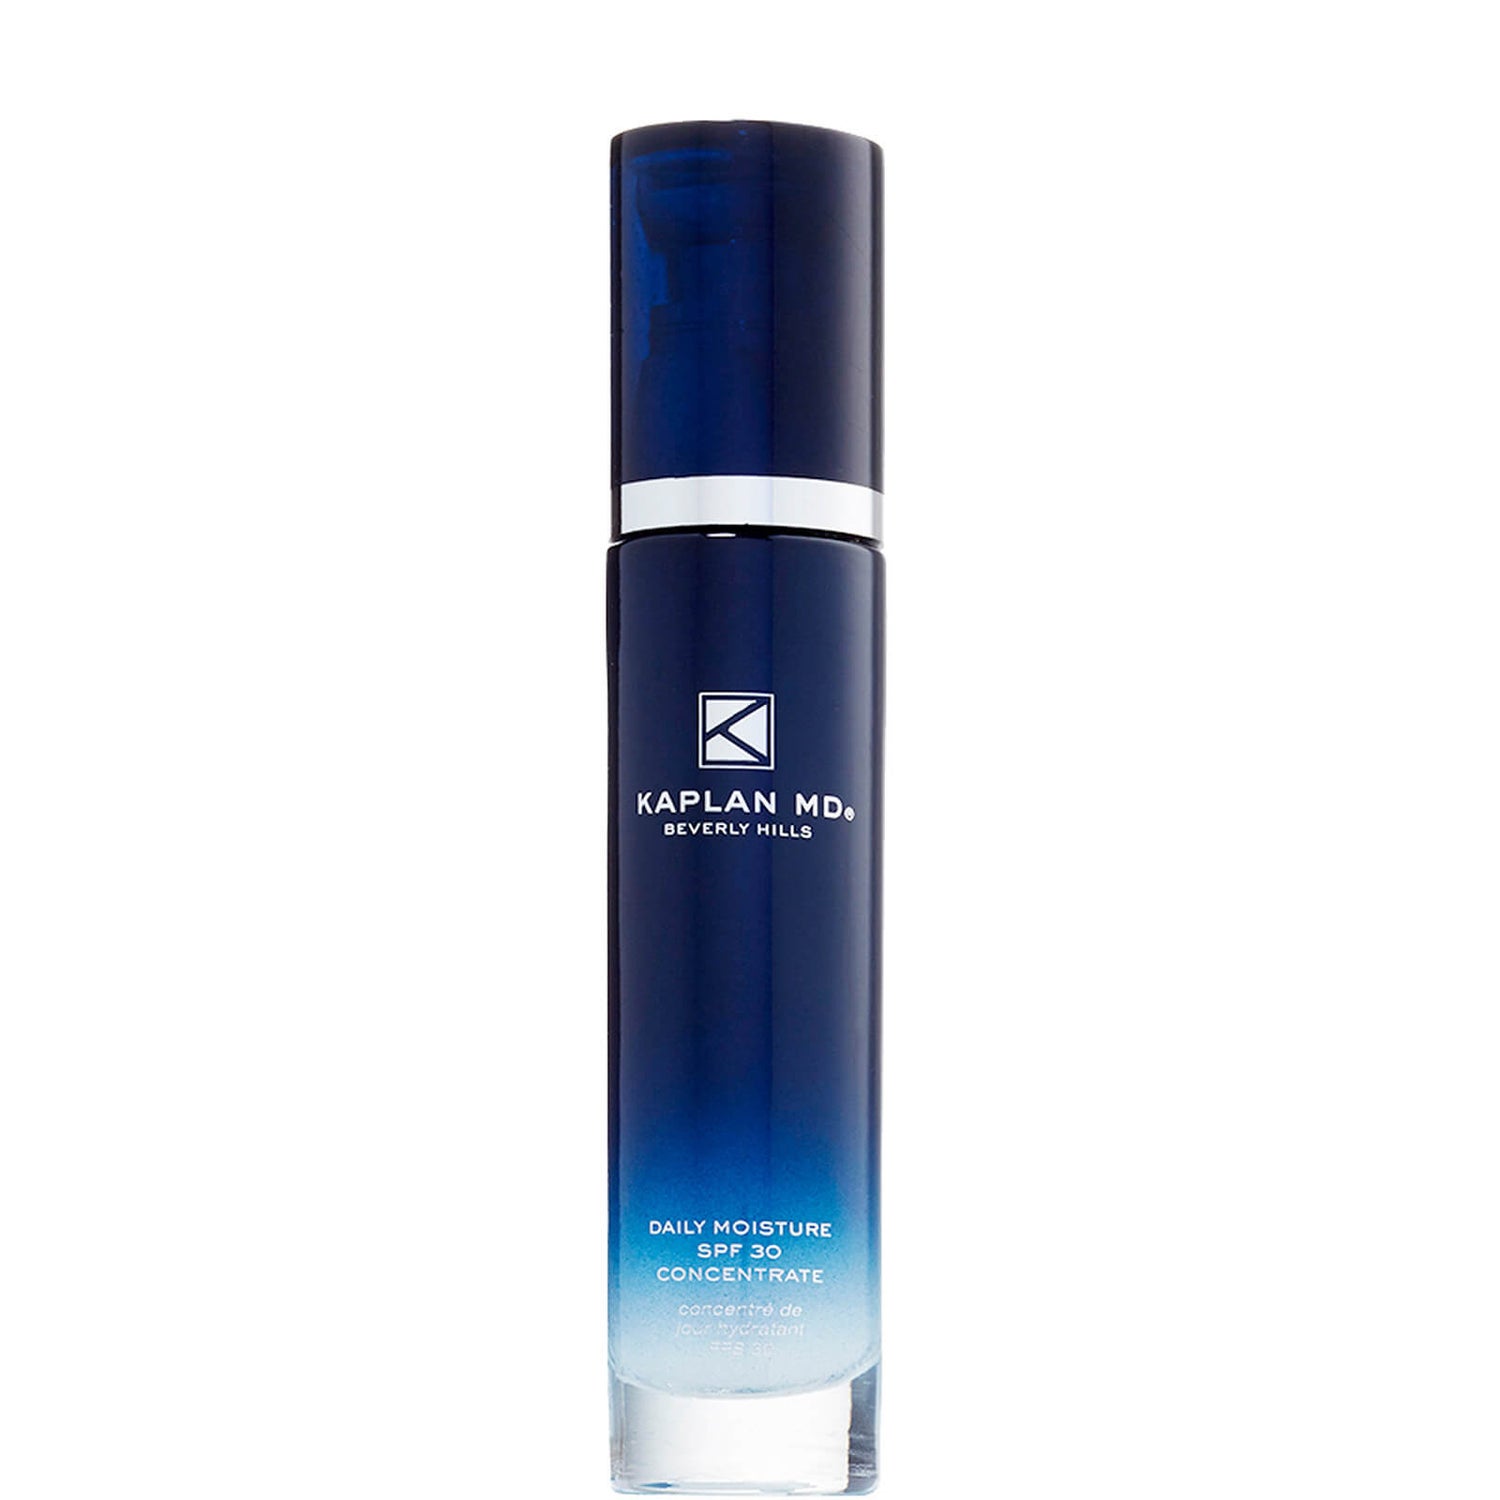 KaplanMD Daily Moisture SPF30 Concentrate